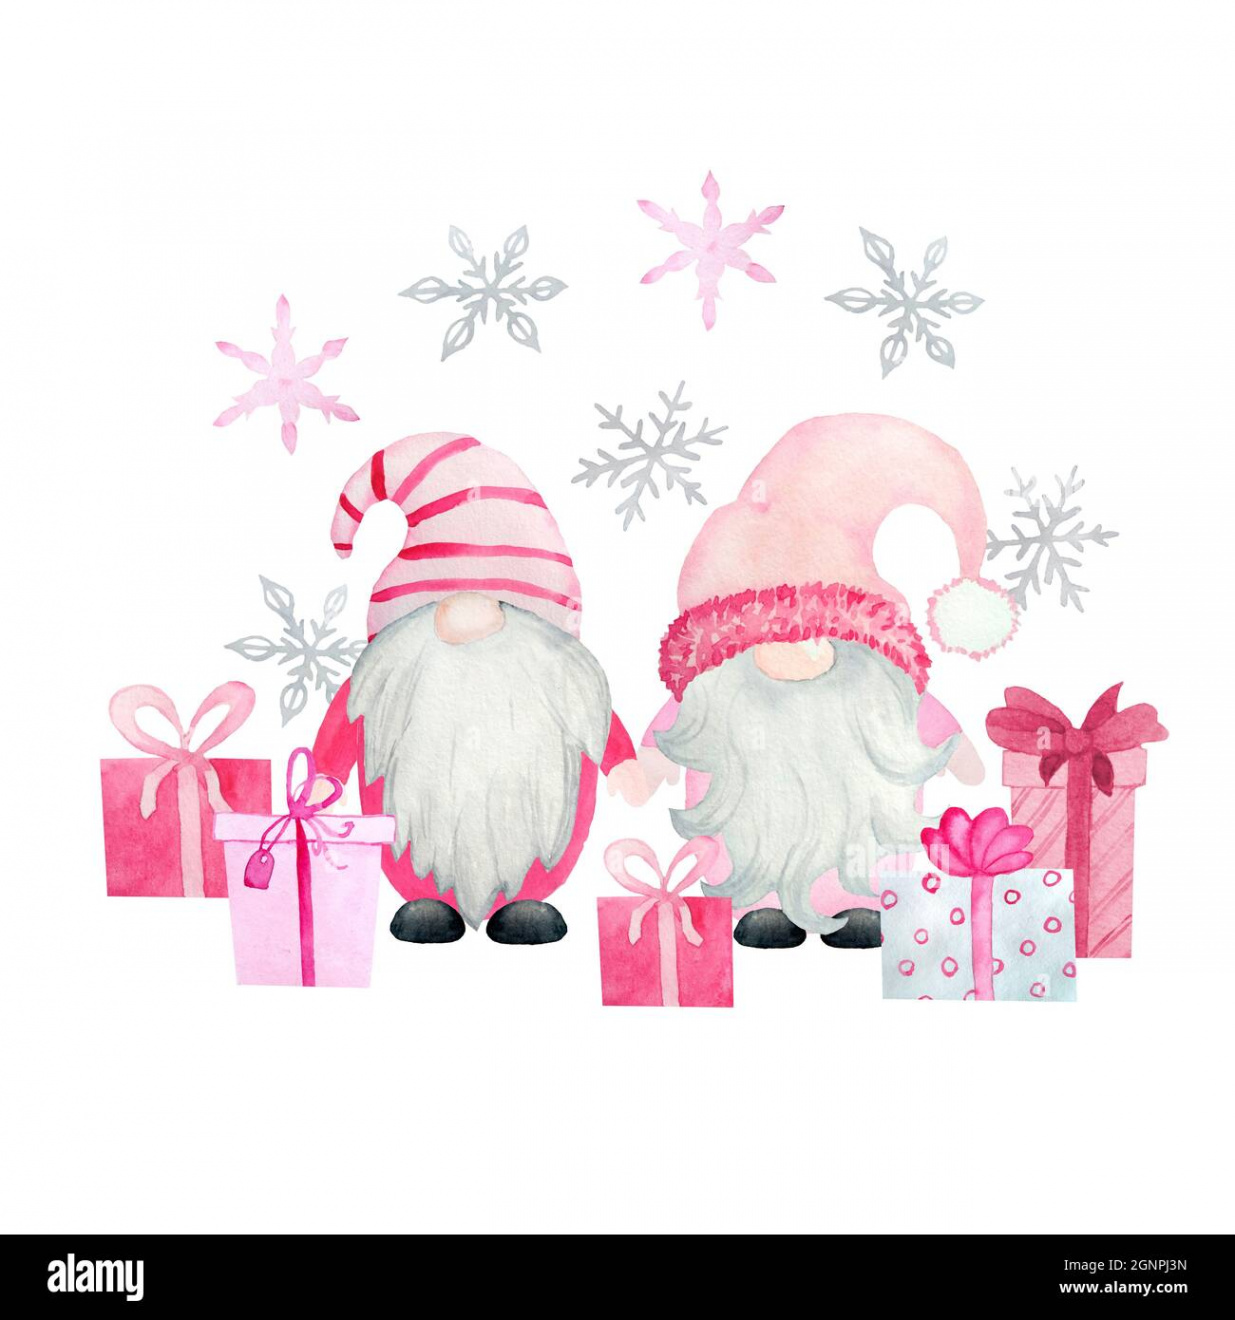 Watercolor hand drawn illustration with pink Christmas gnomes, new